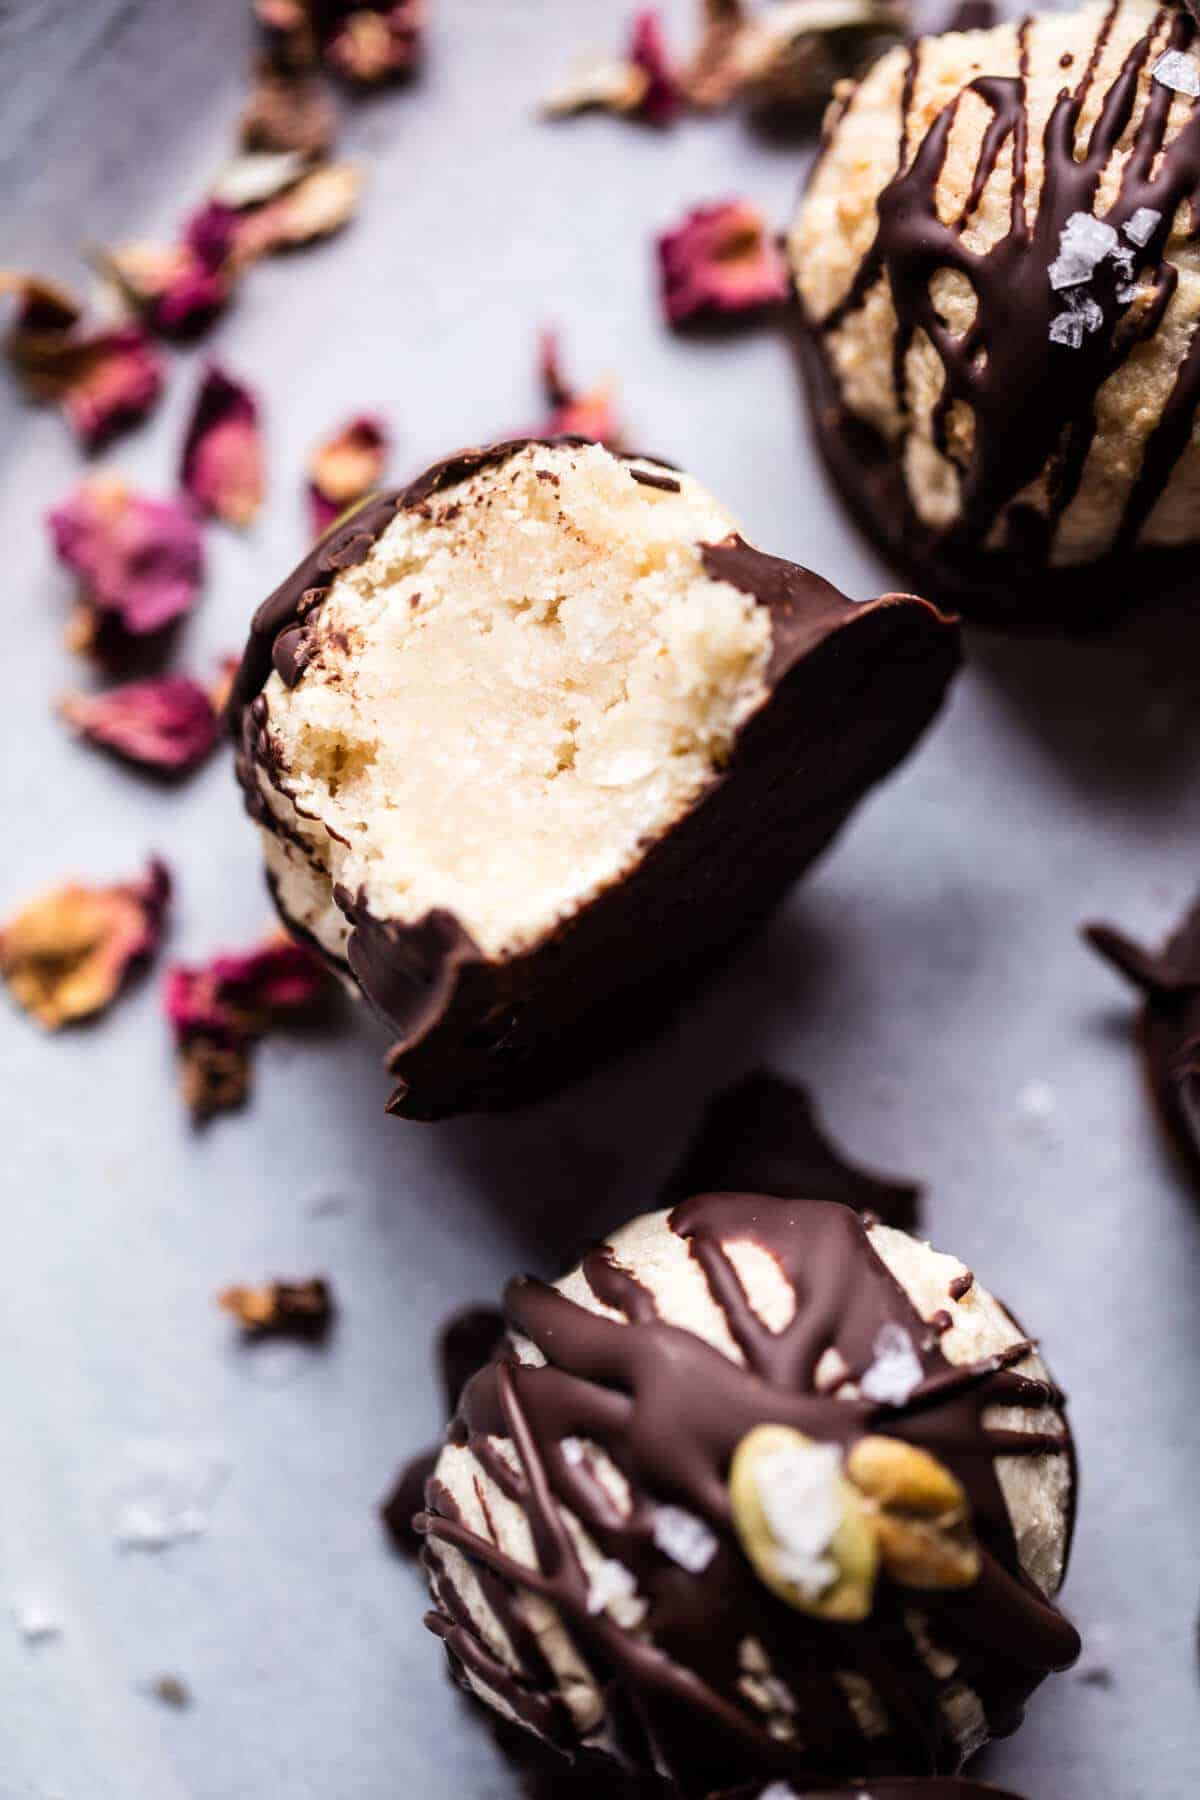 Chocolate dipped coconut caramel macaroons